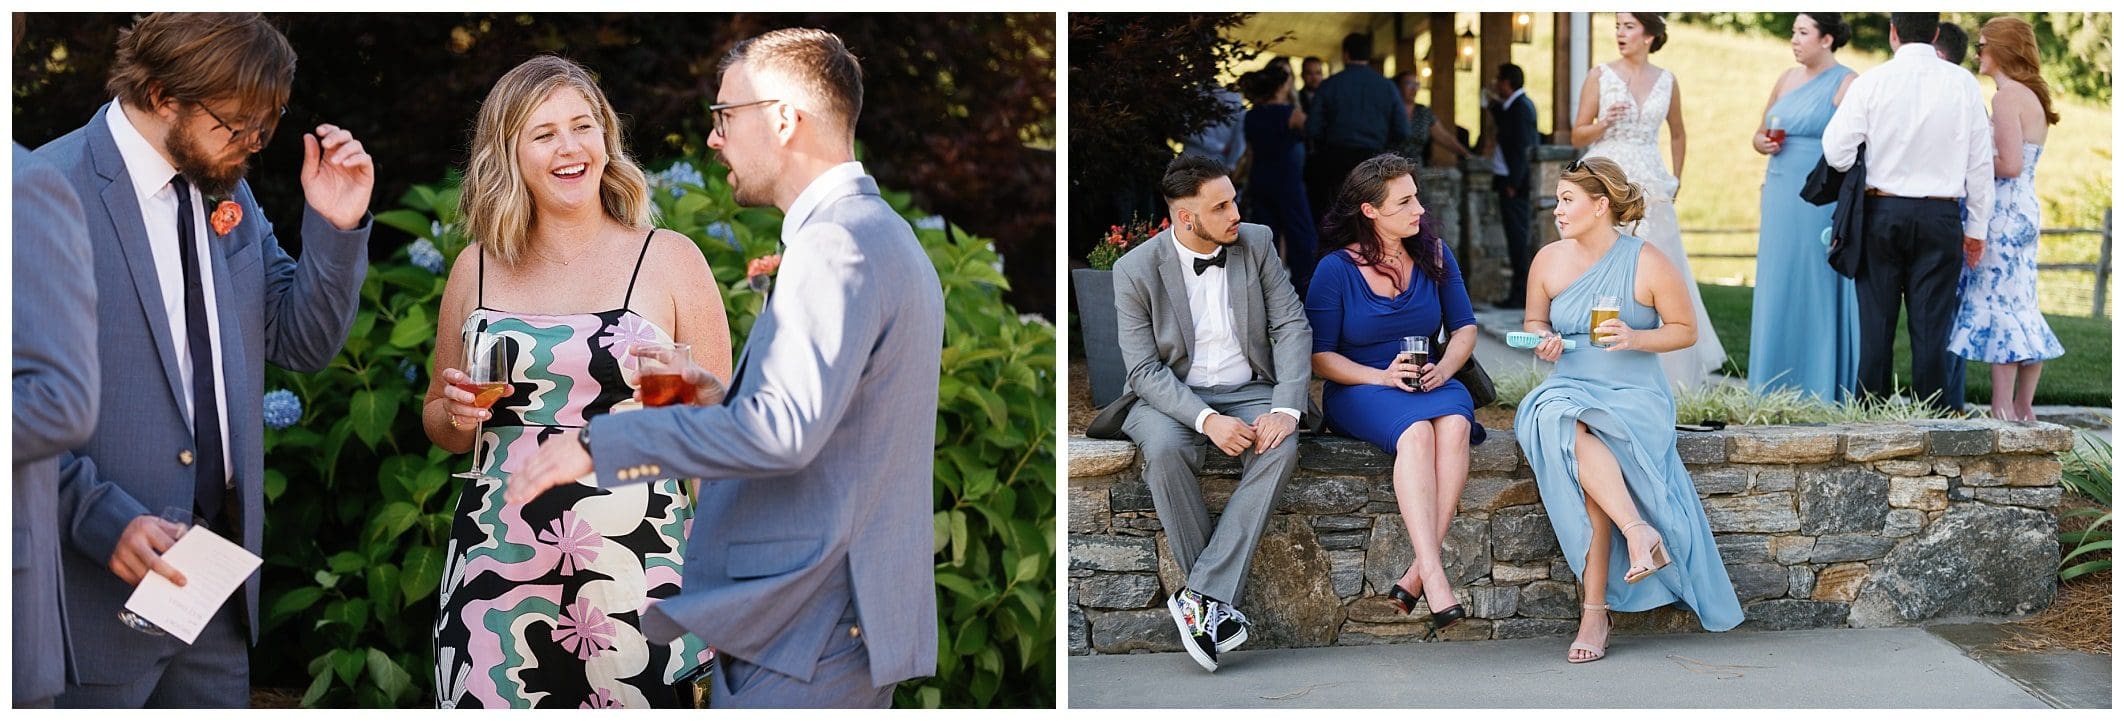 Four pictures of people at a wedding reception.